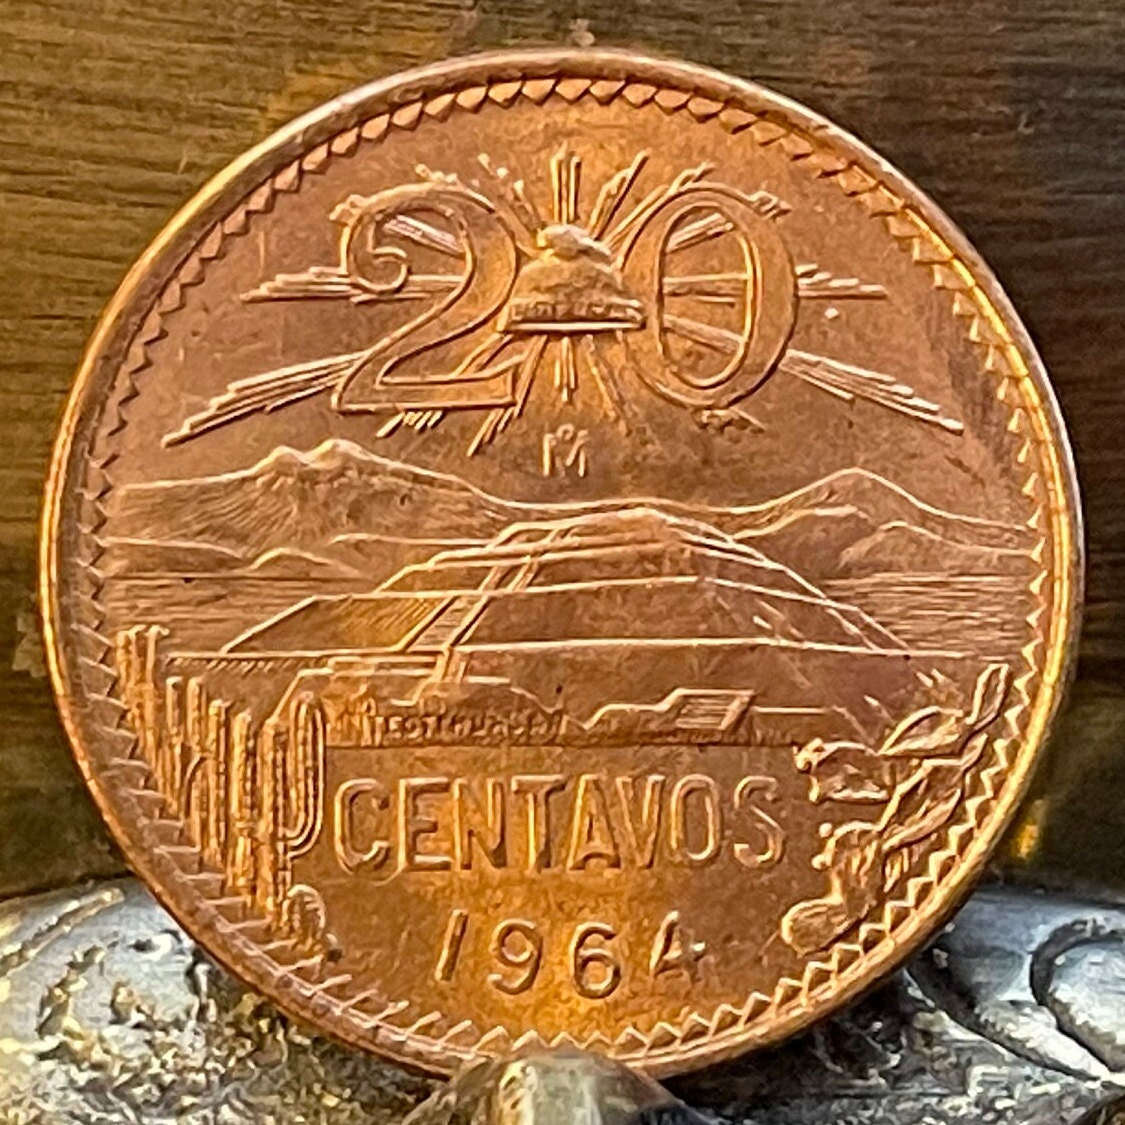 Teotihuacán Pyramid of Sun, Popocatépetl and Iztaccíhuatl Volcanoes & Eagle with Snake 20 Centavos Mexico Authentic Coin Money for Jewelry